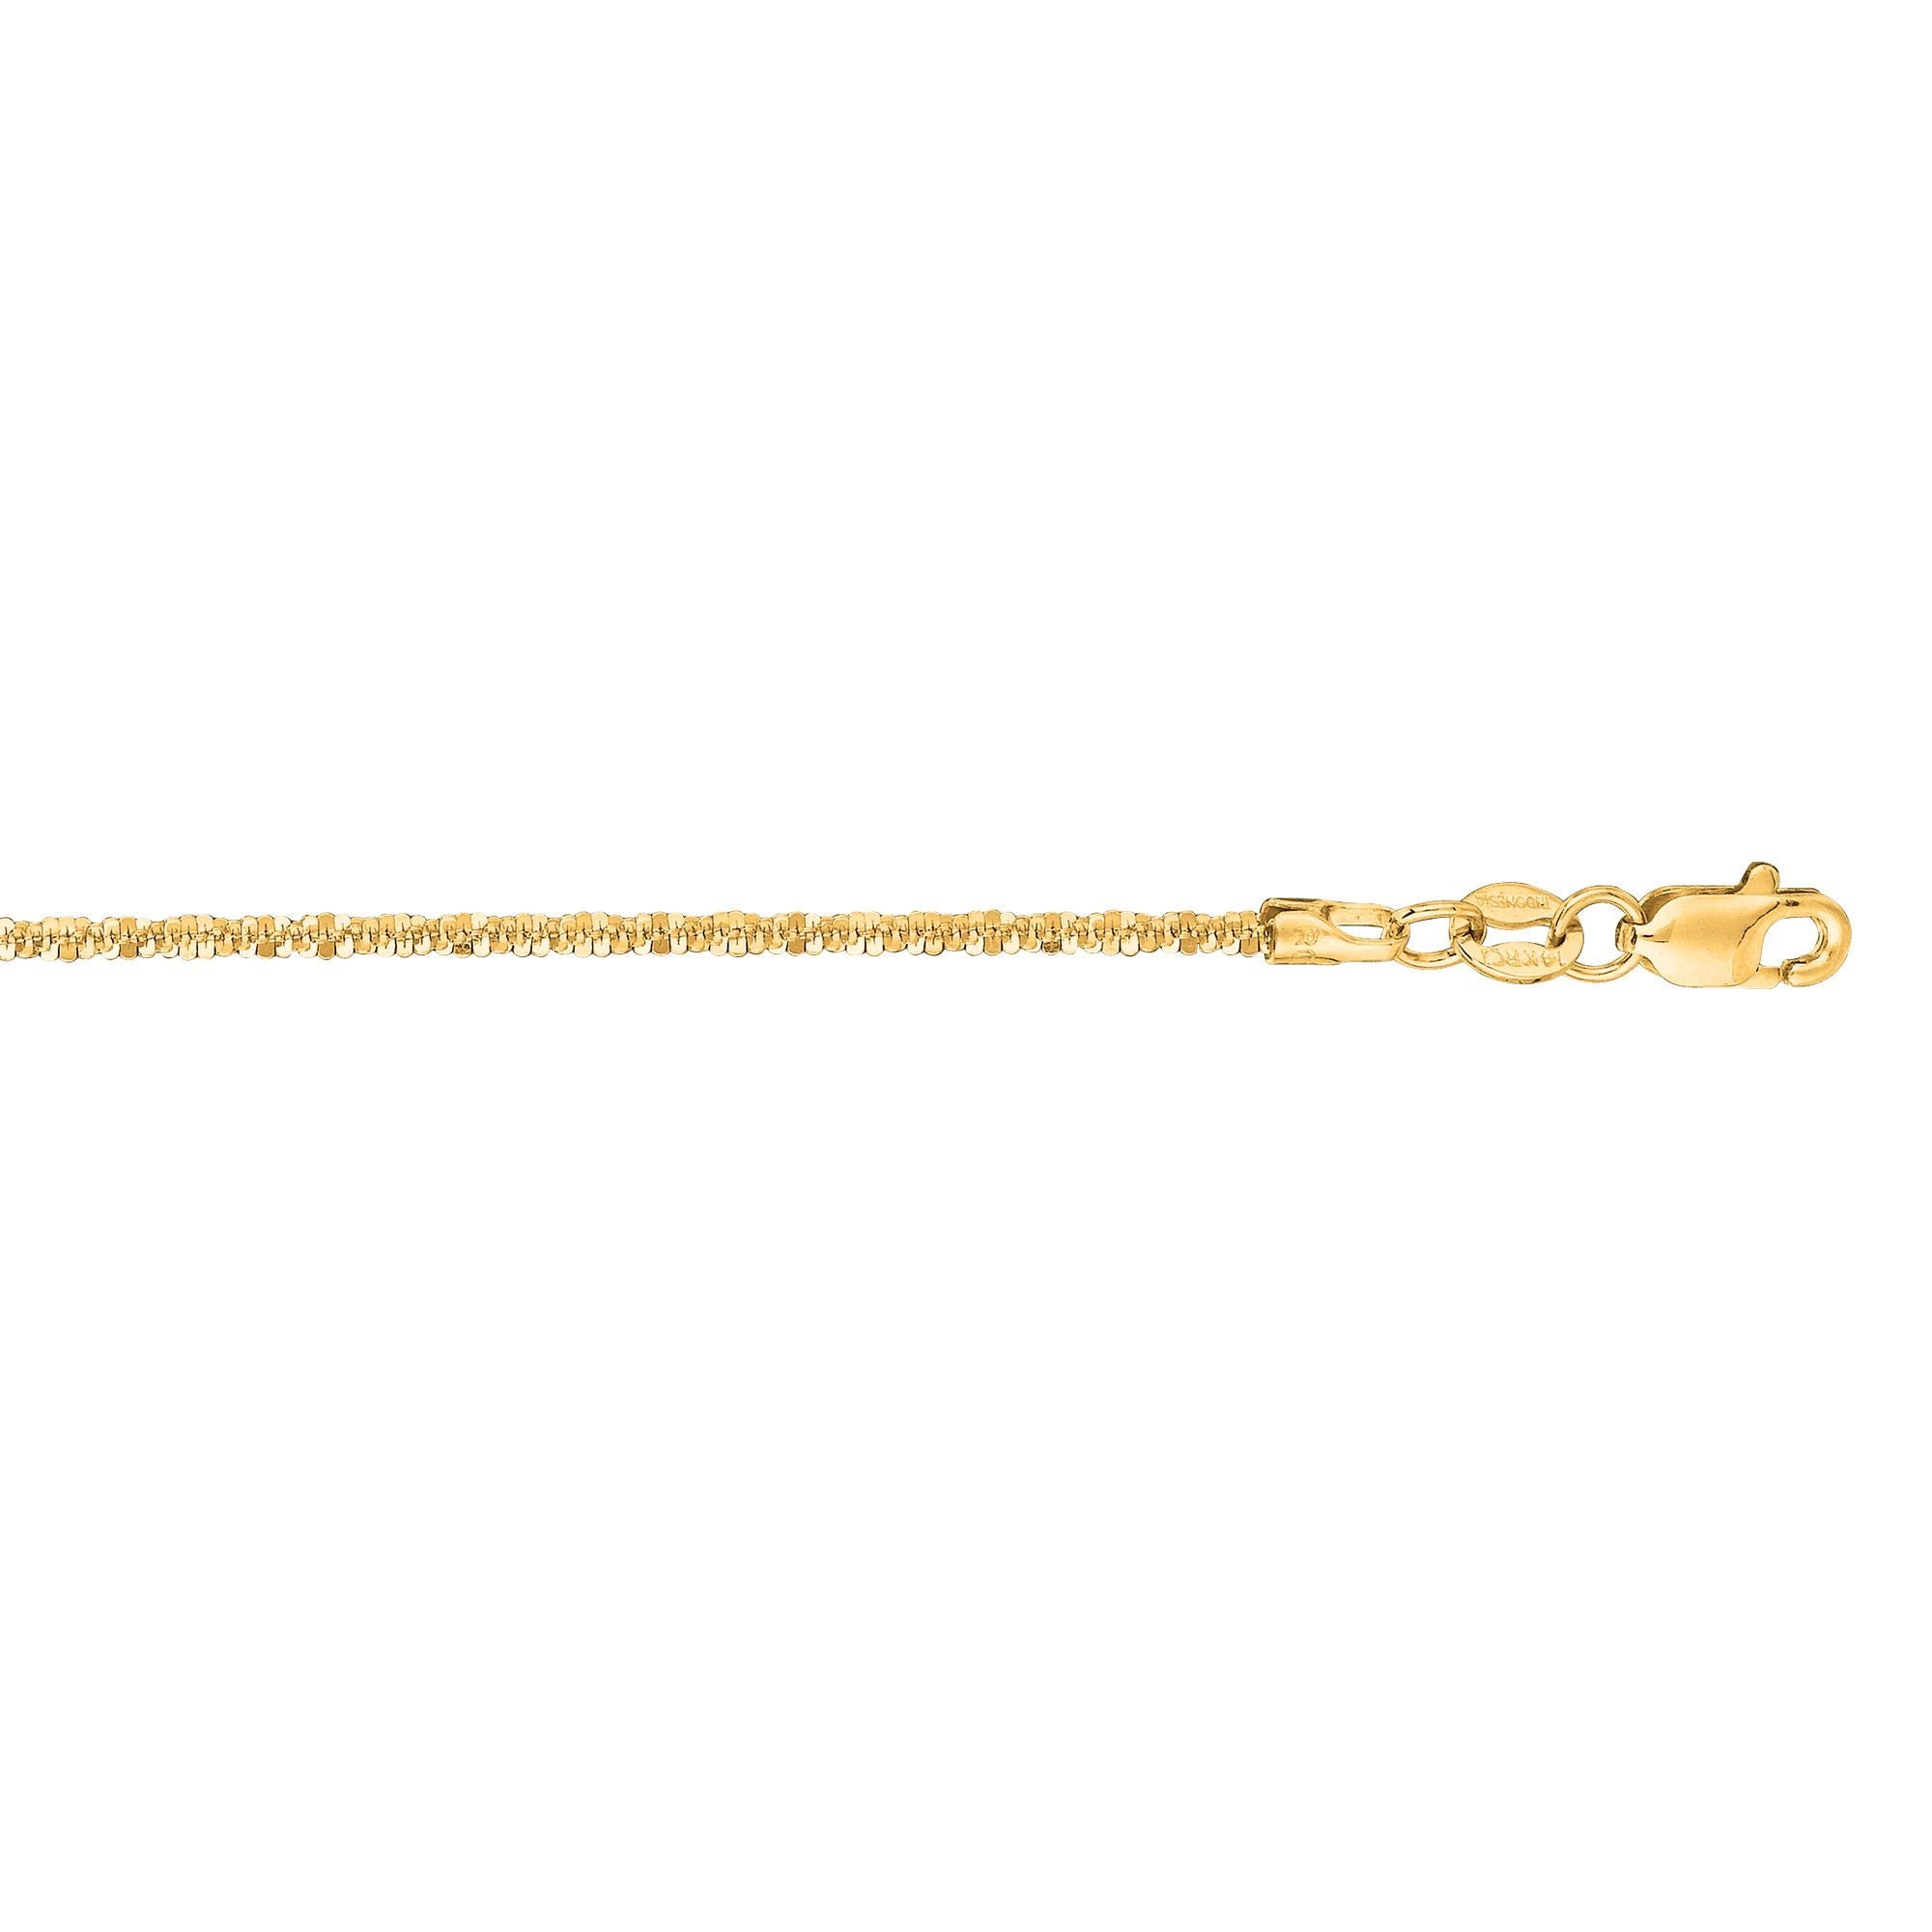 Shiny Diamond Cut Sparkle Chain with Lobster Clasp - wingroupjewelry